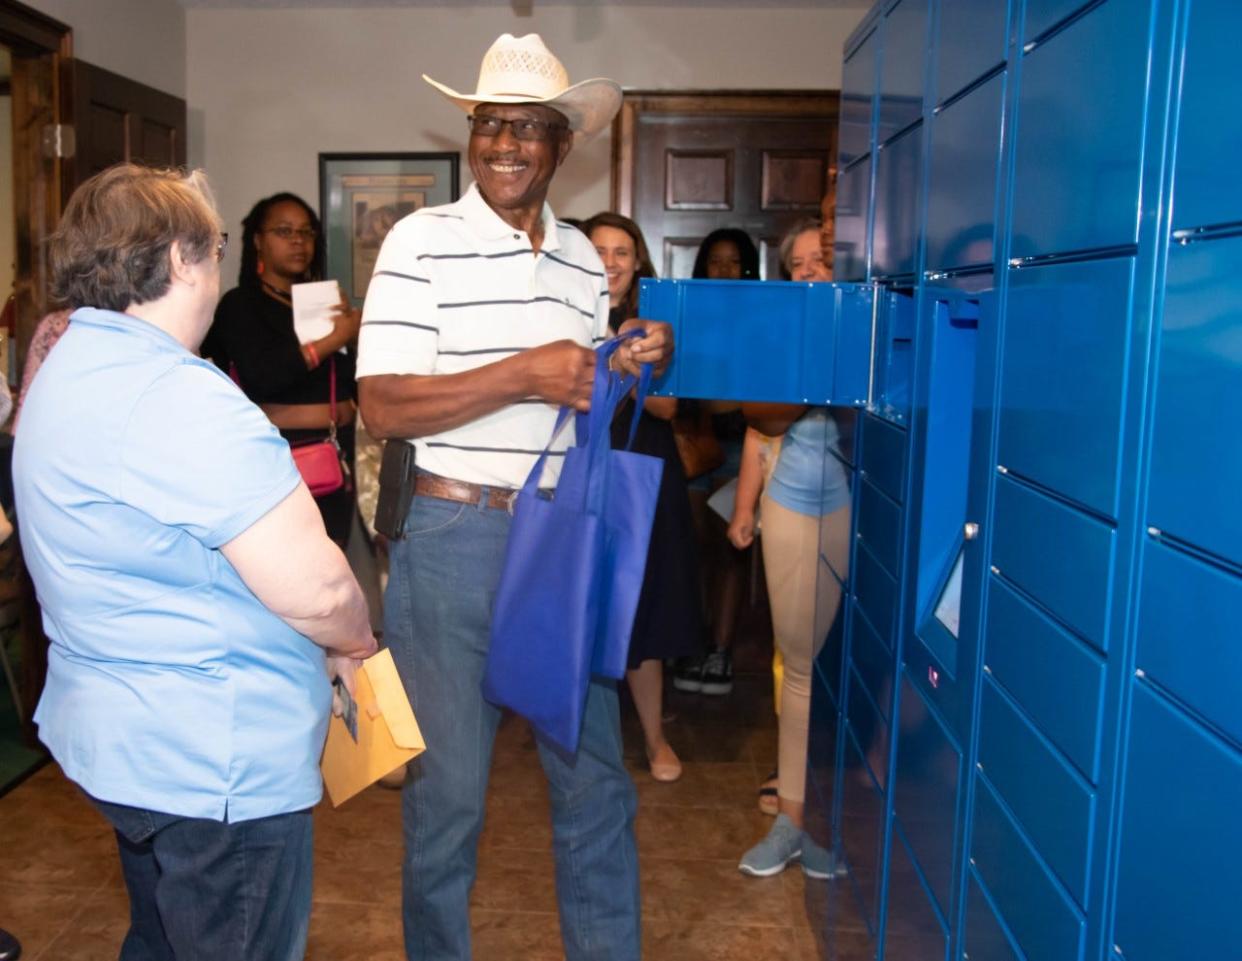 Godwin Mayor Willie J. Burnette becomes the first customer on June 28, 2022, to open a locker on the automated book locker installed in the Godwin Town Hall, after how-to instructions from Cumberland County Library Division Manager Nora Armstrong, left.